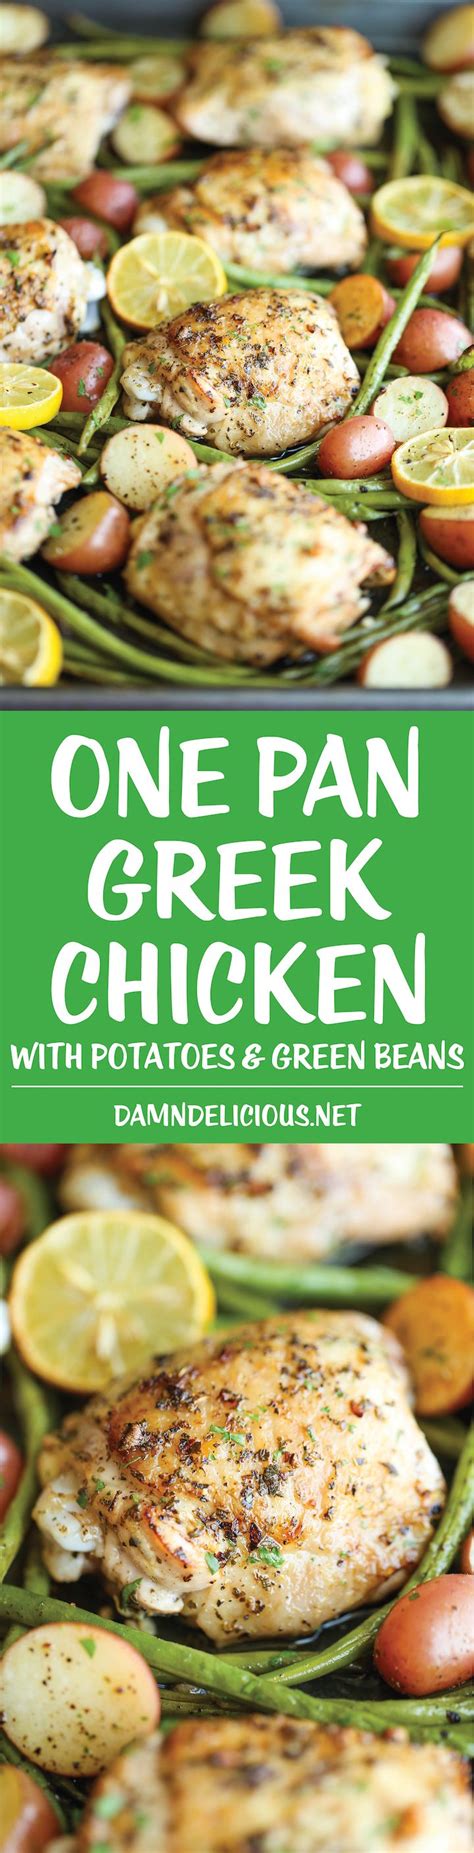 One Pan Greek Chicken The Easiest No Fuss Weeknight Meal With A